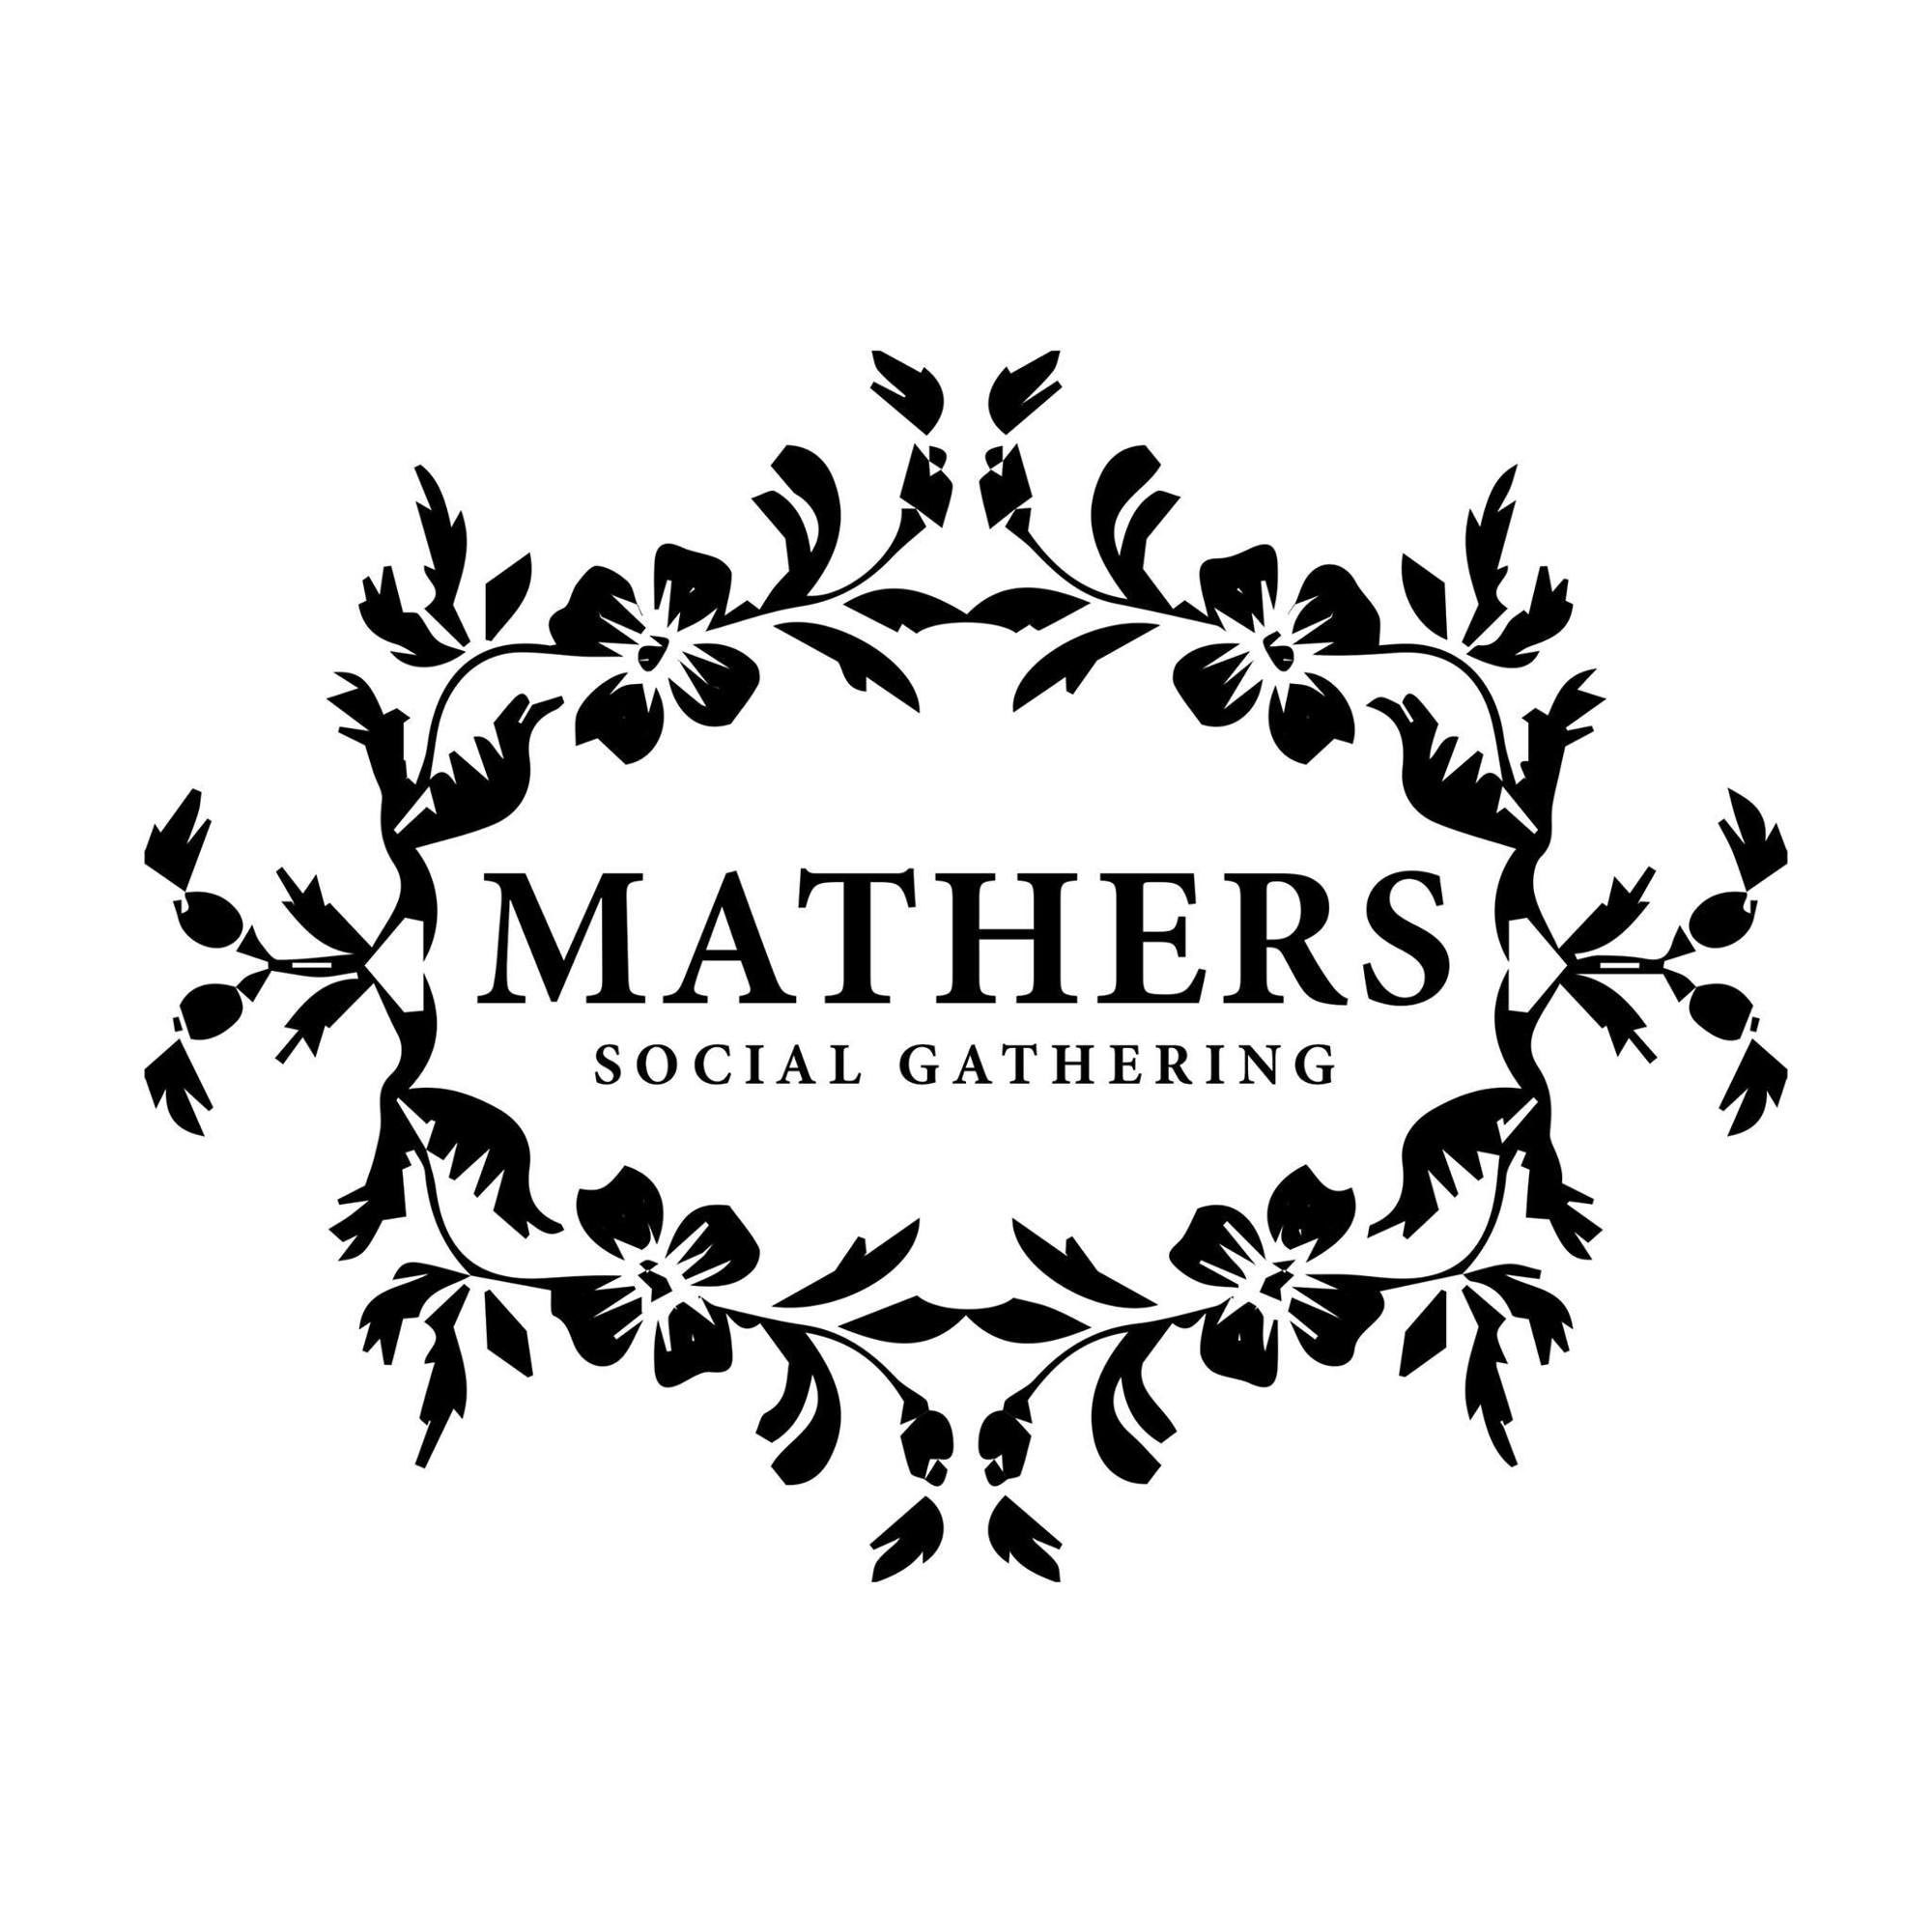 The logo for Mathers Social Gathering.